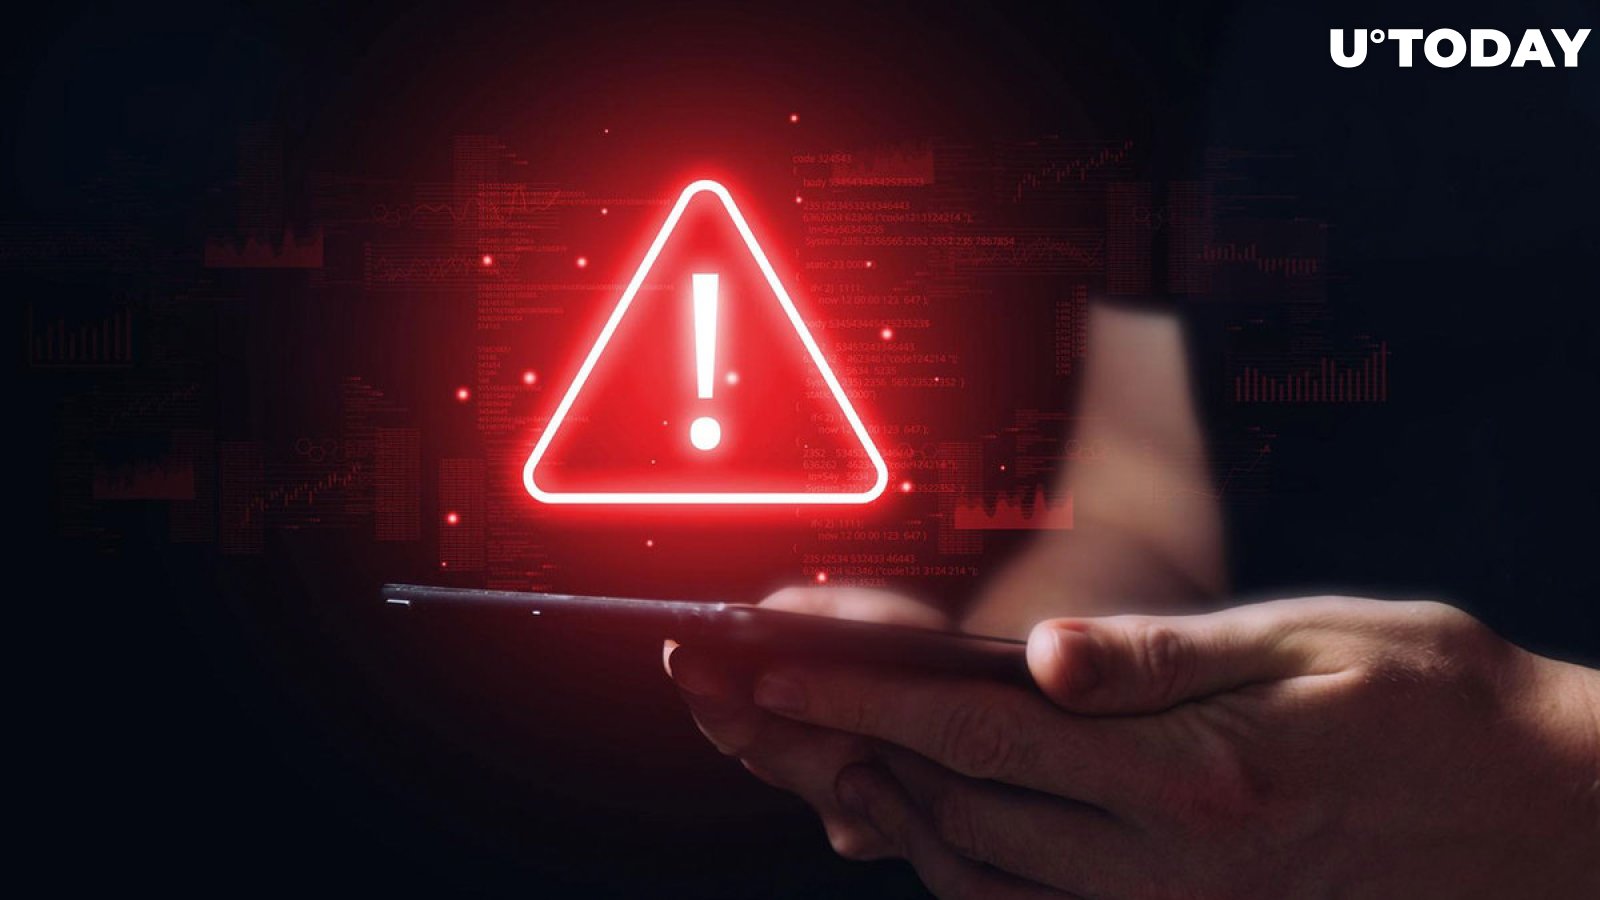 Major Crypto Wallet Issues Crucial Warning to Community: Details